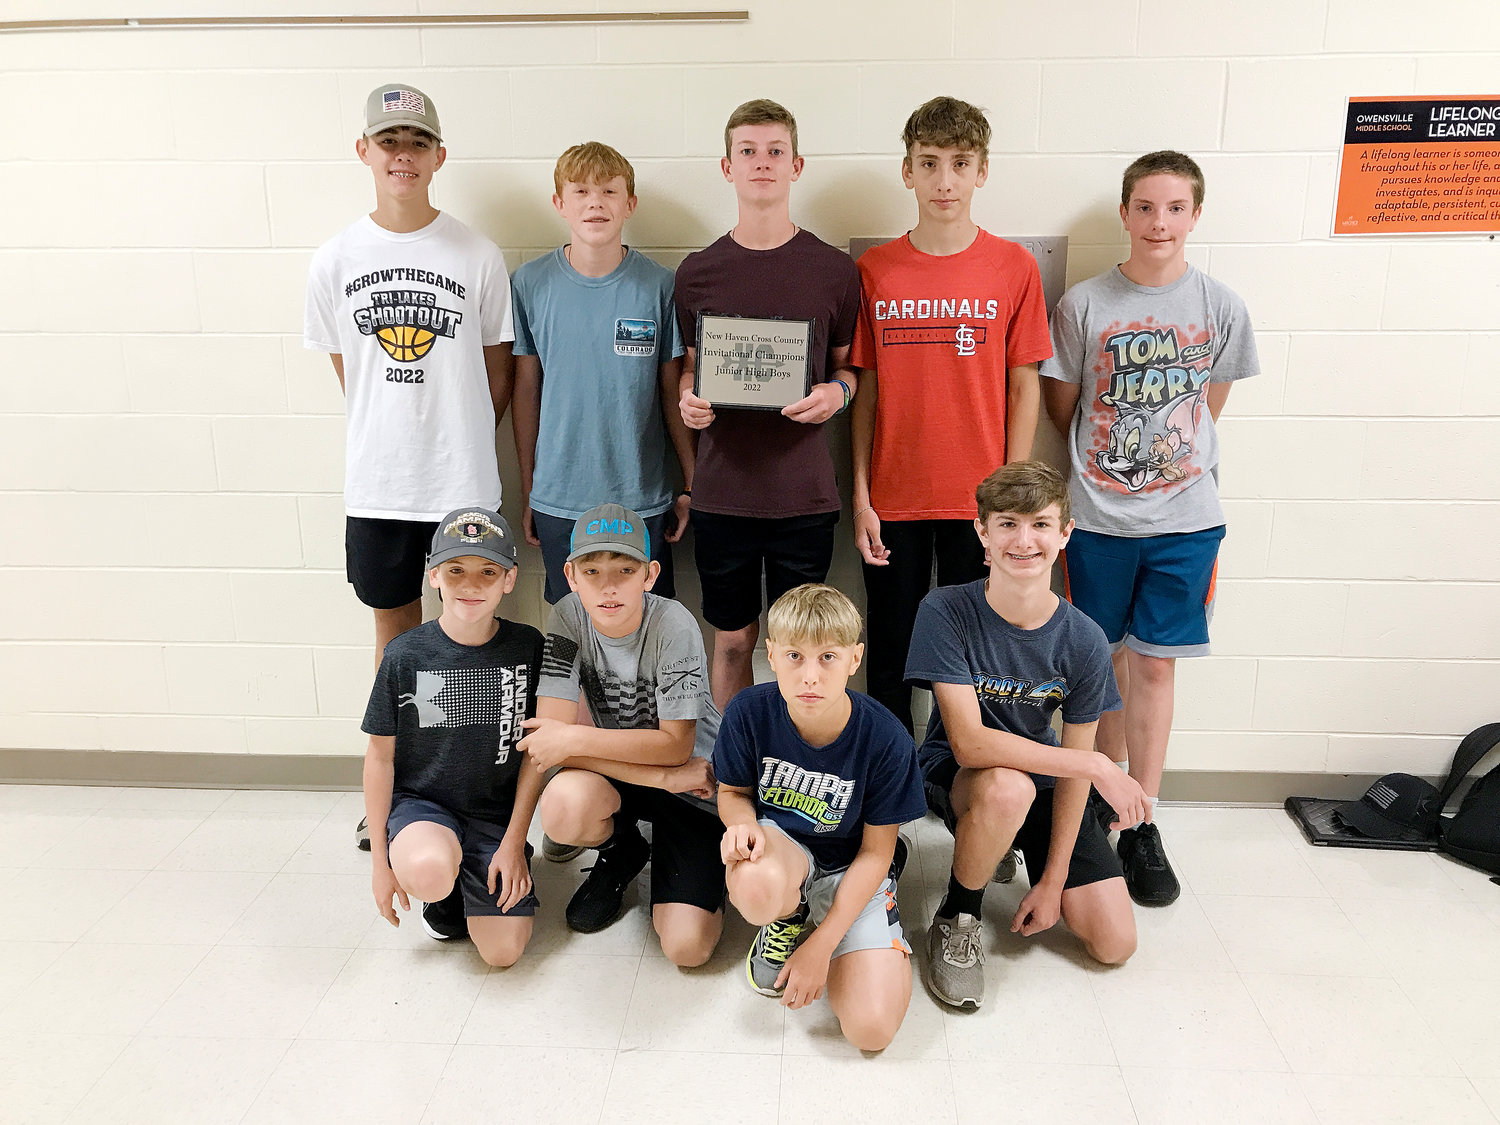 OMS Dutchmen cross country team members (in front, from left) gathering Tuesday morning for a picture with their championship plaque from New Haven include Aaiden Cox, Drake Dietrich, Shane Fudge and Maddix Lebish; and in back, Bryce Kramme, Kylen Menz, Zach Holtmeyer, Braden Perkins and Elliott Cooper. Not pictured but also competing at New Haven for OMS’ Dutchmen were Granite Miles, Corbin Brand, Zayden Garver, Nick Hinson and Ethan Blankenship.